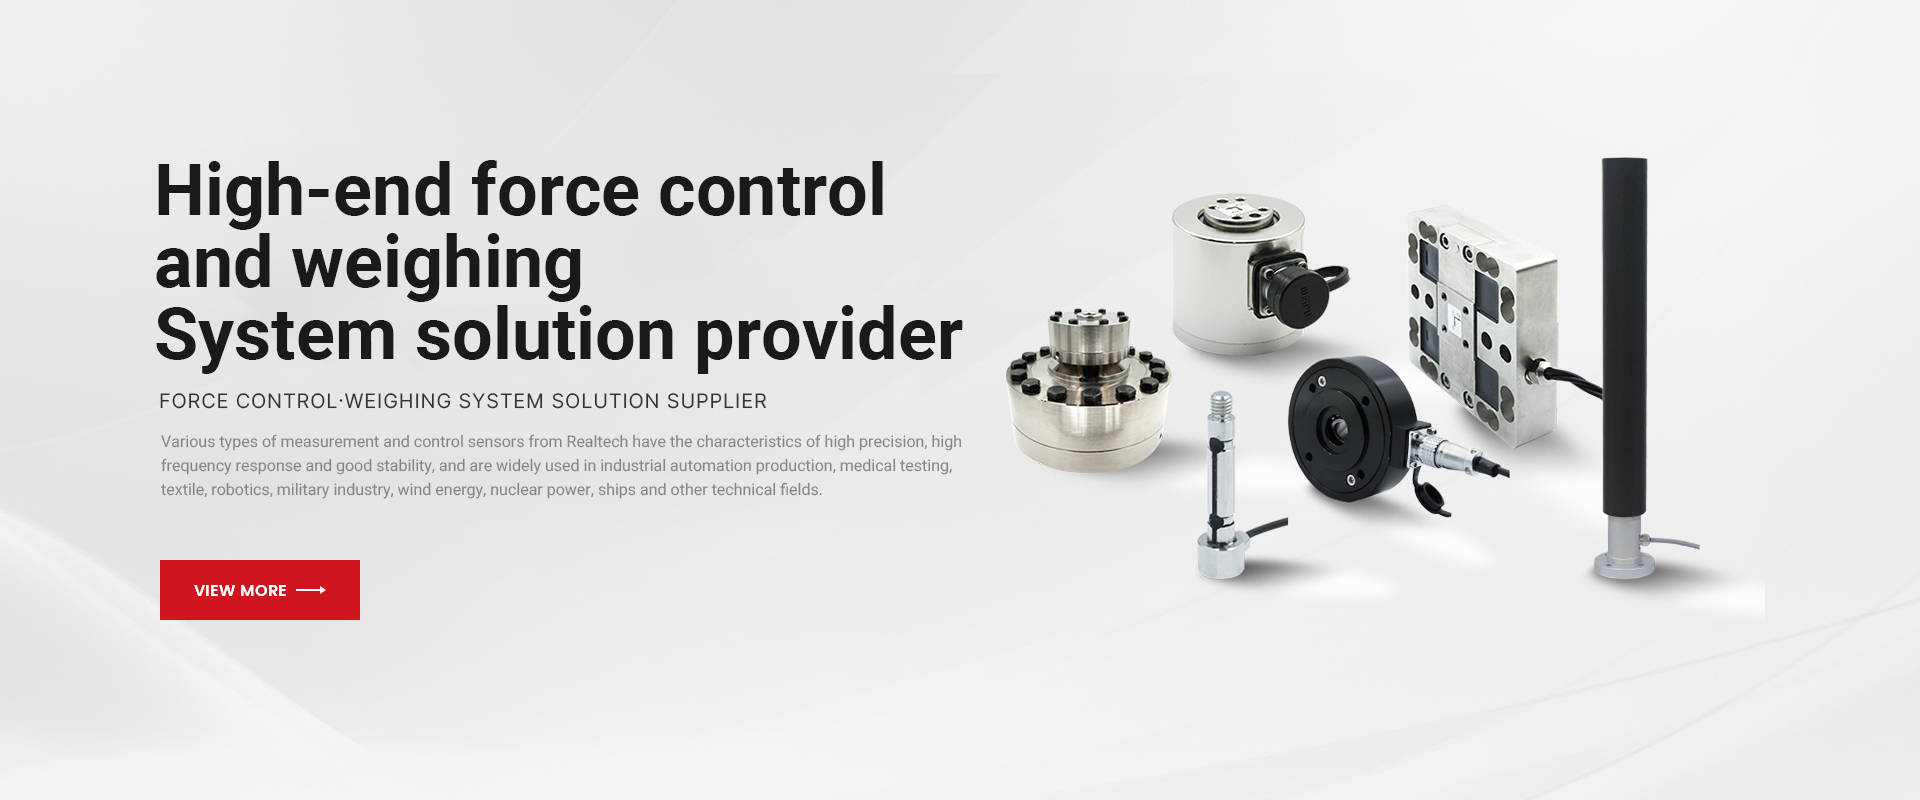 Changzhou Right Measurement and Control System Co., Ltd